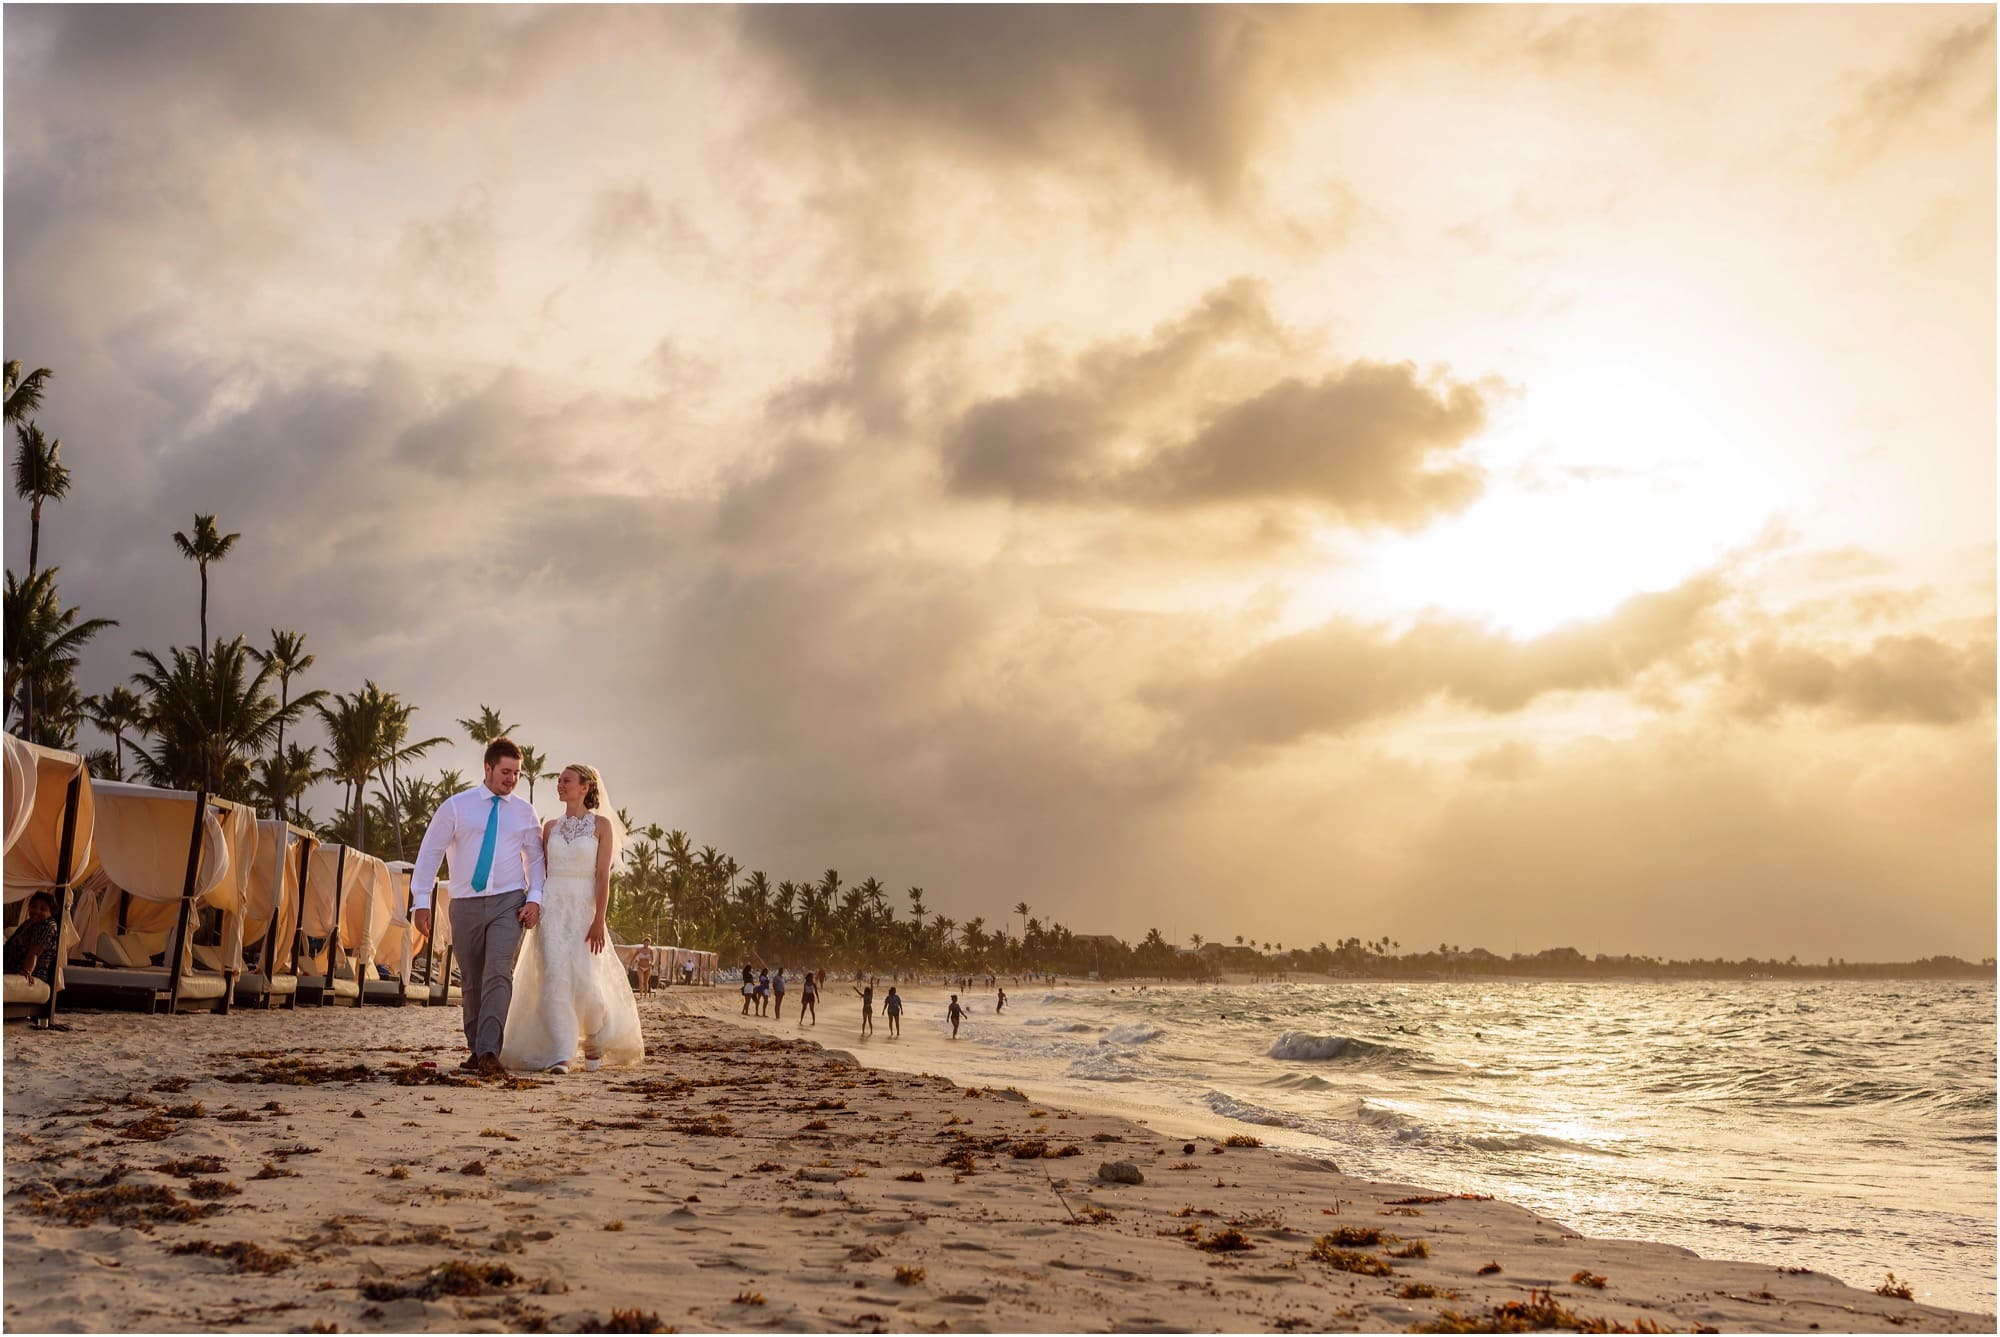 Walking on the Dominican Republic beach after being wed